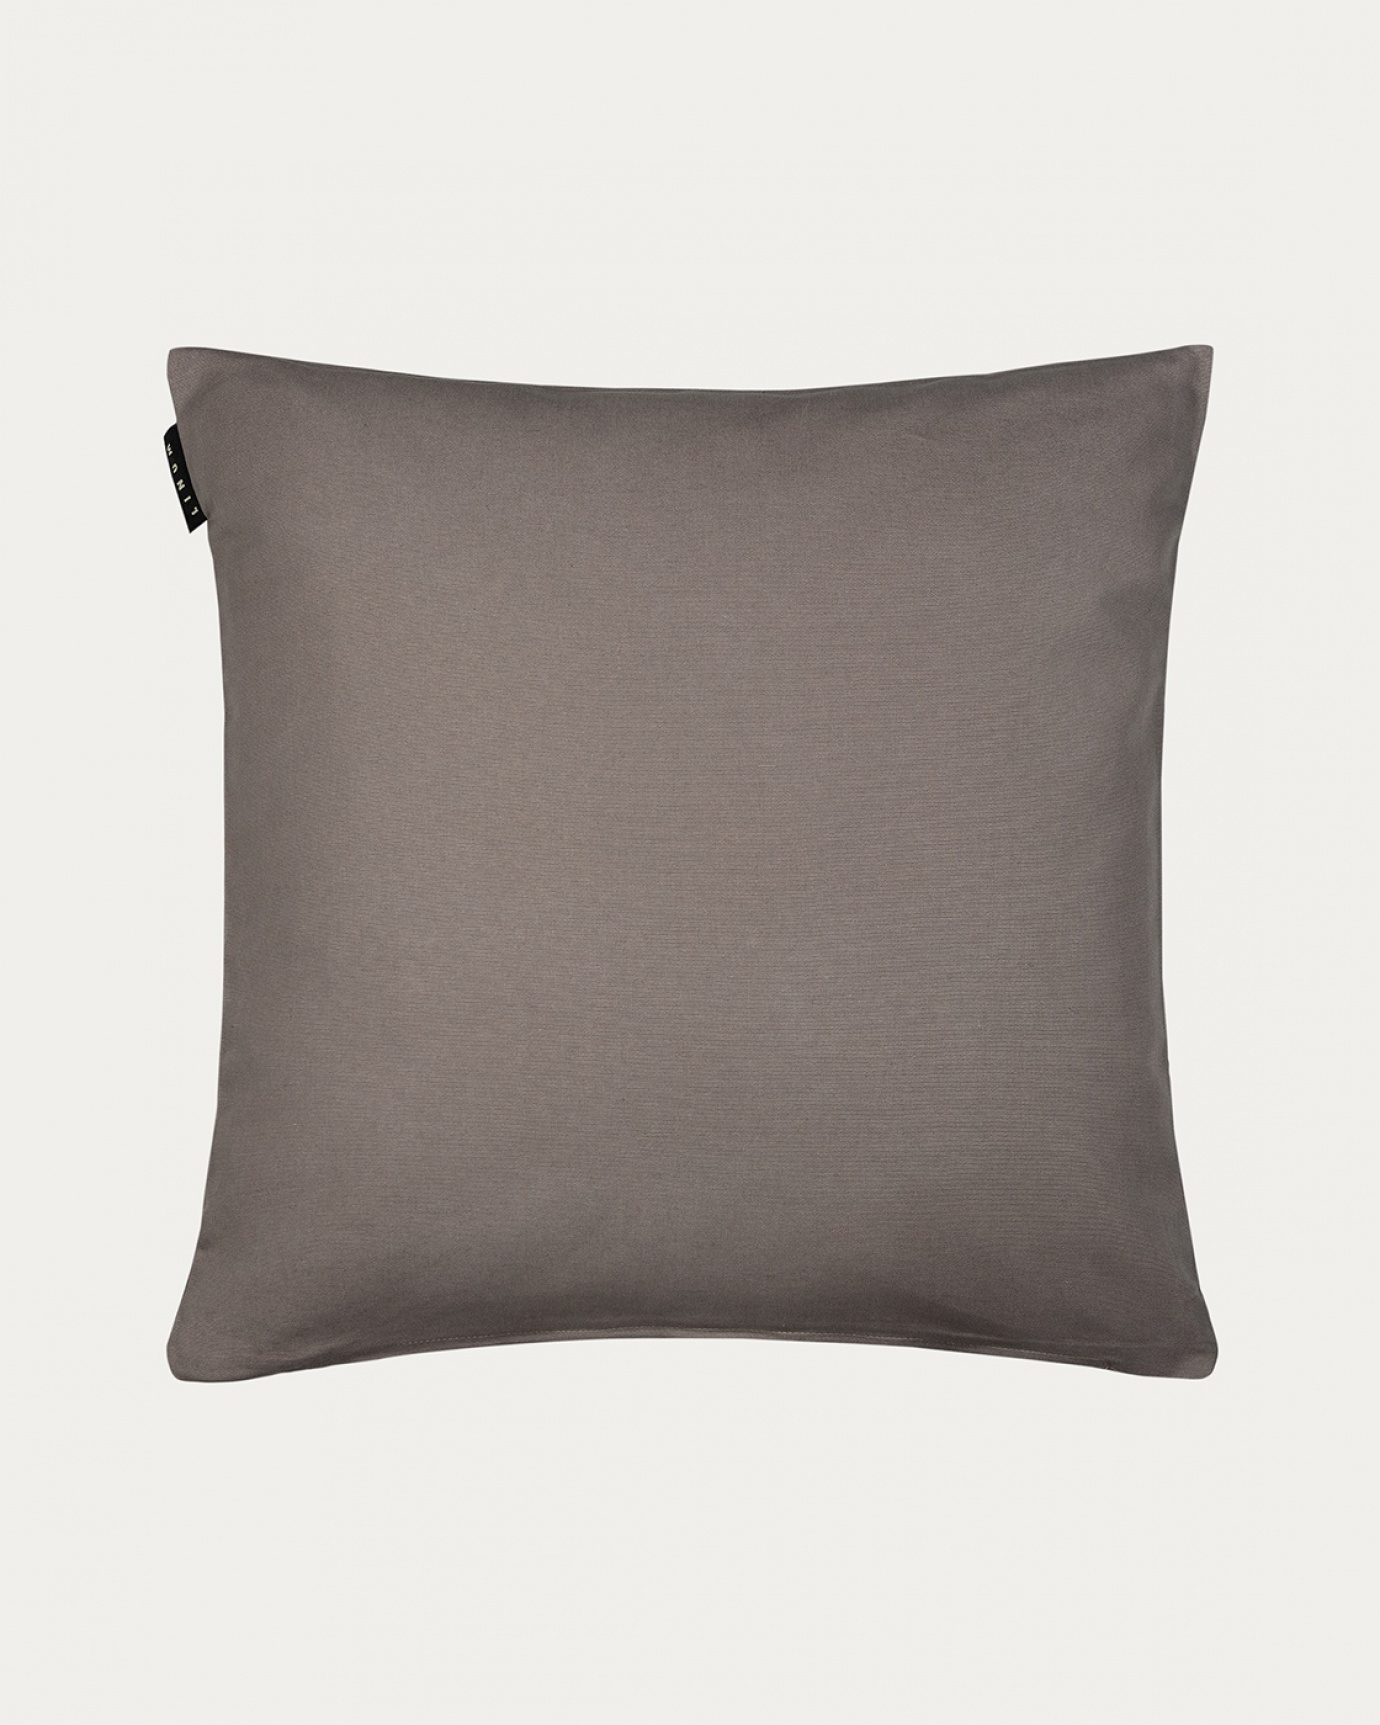 Product image mole brown ANNABELL cushion cover made of soft cotton from LINUM DESIGN. Size 50x50 cm.